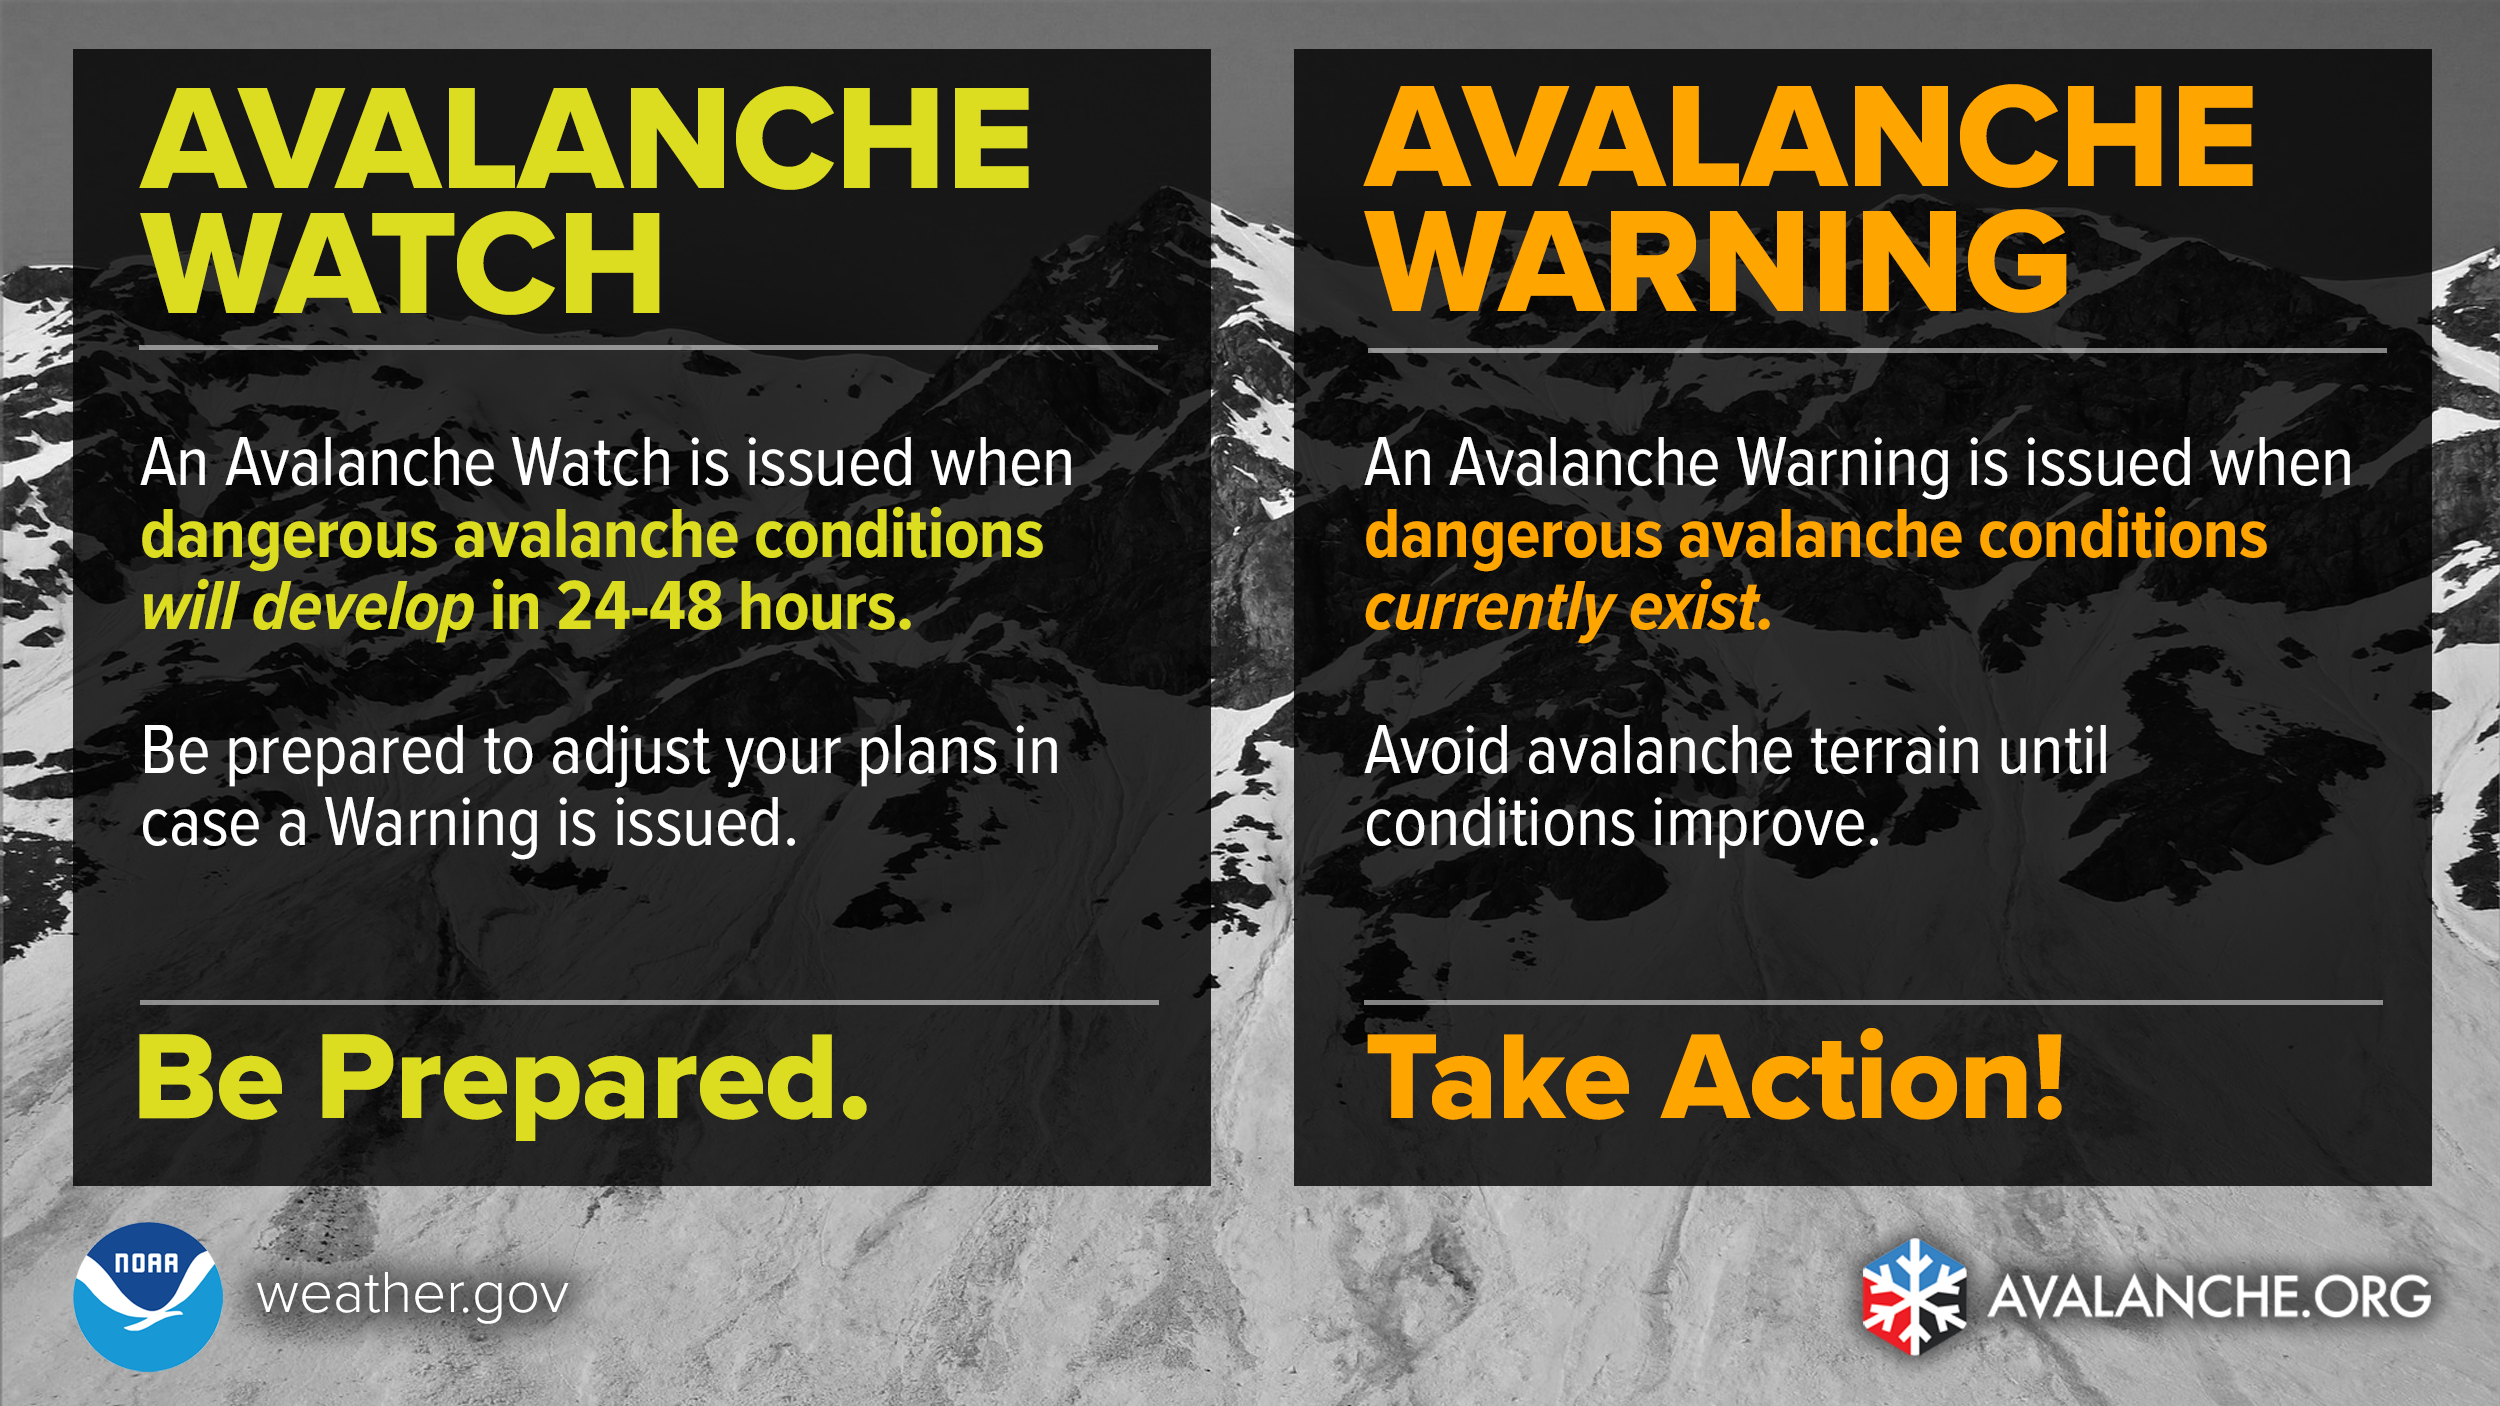 An Avalanche Watch is issued when dangerous avalanche conditions are possible. Be prepared to adjust your plans in case a Warning is issued. An Avalanche Warning is issued when dangerous avalanche conditions currently exist. Avoid avalanche terrain until conditions improve.